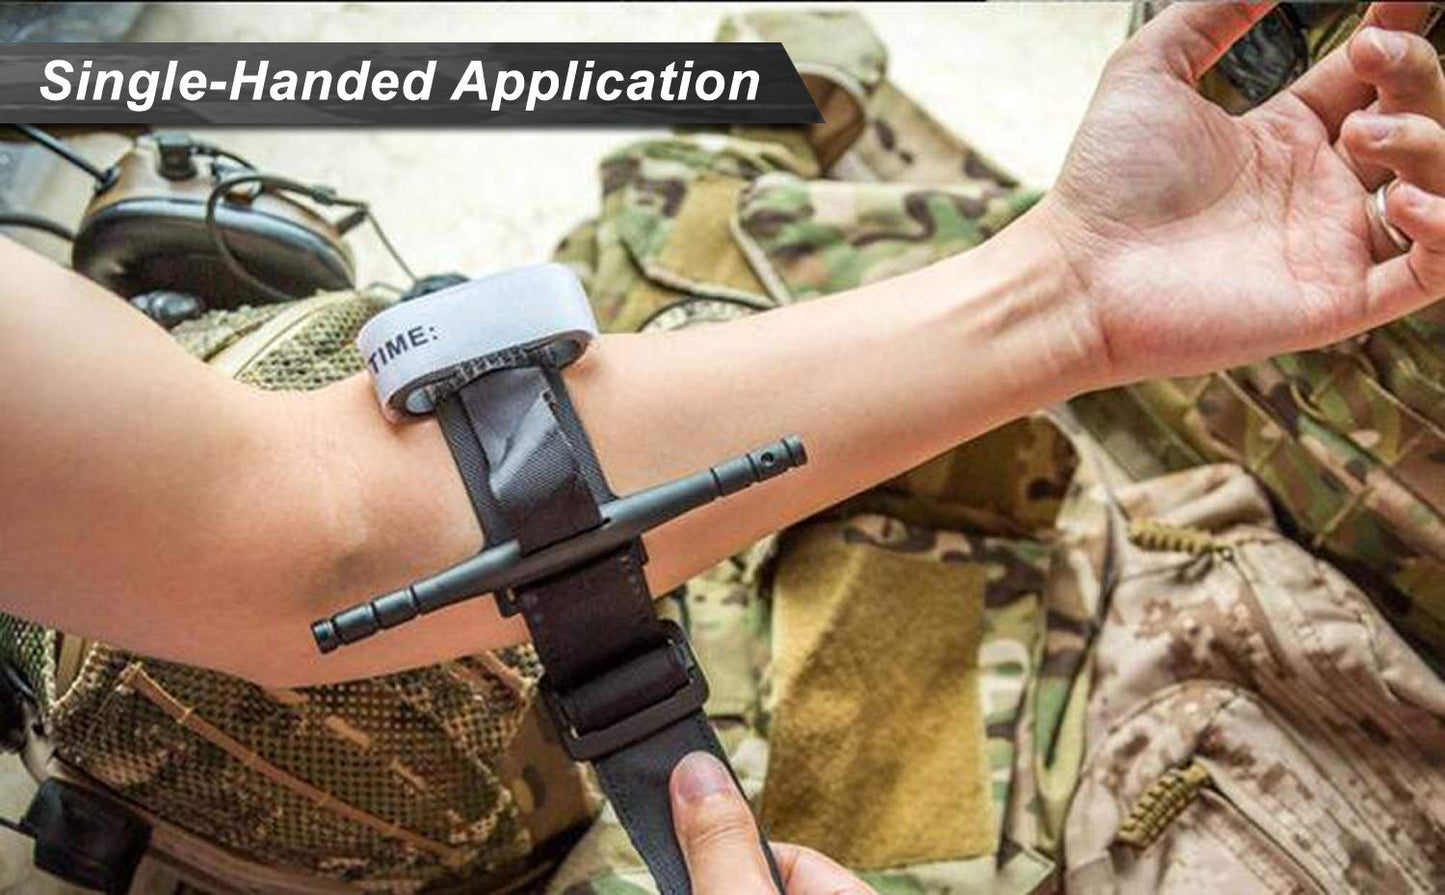 Tourniquet, 3 Pack - the Fastest, Safest, Most Effective Combat Hemostatic Control Single-Handed Application for Military Tactical First Aid Medical Battle Tourniquets